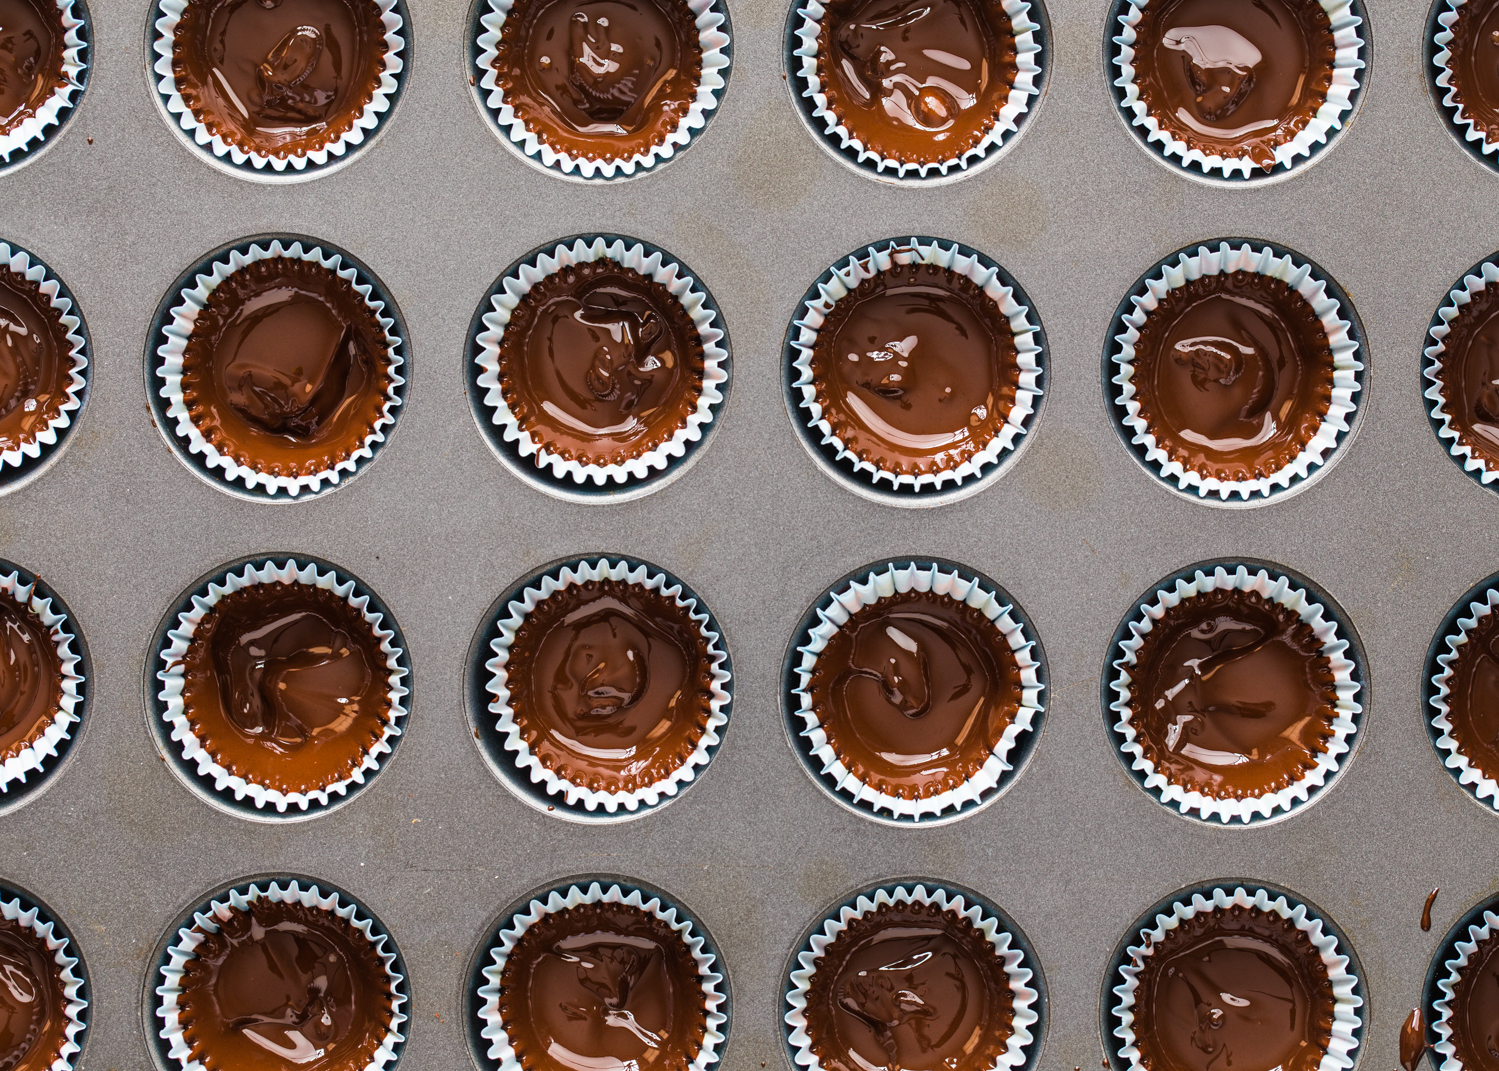 Fruity Mallow Cups start with rich dark chocolate